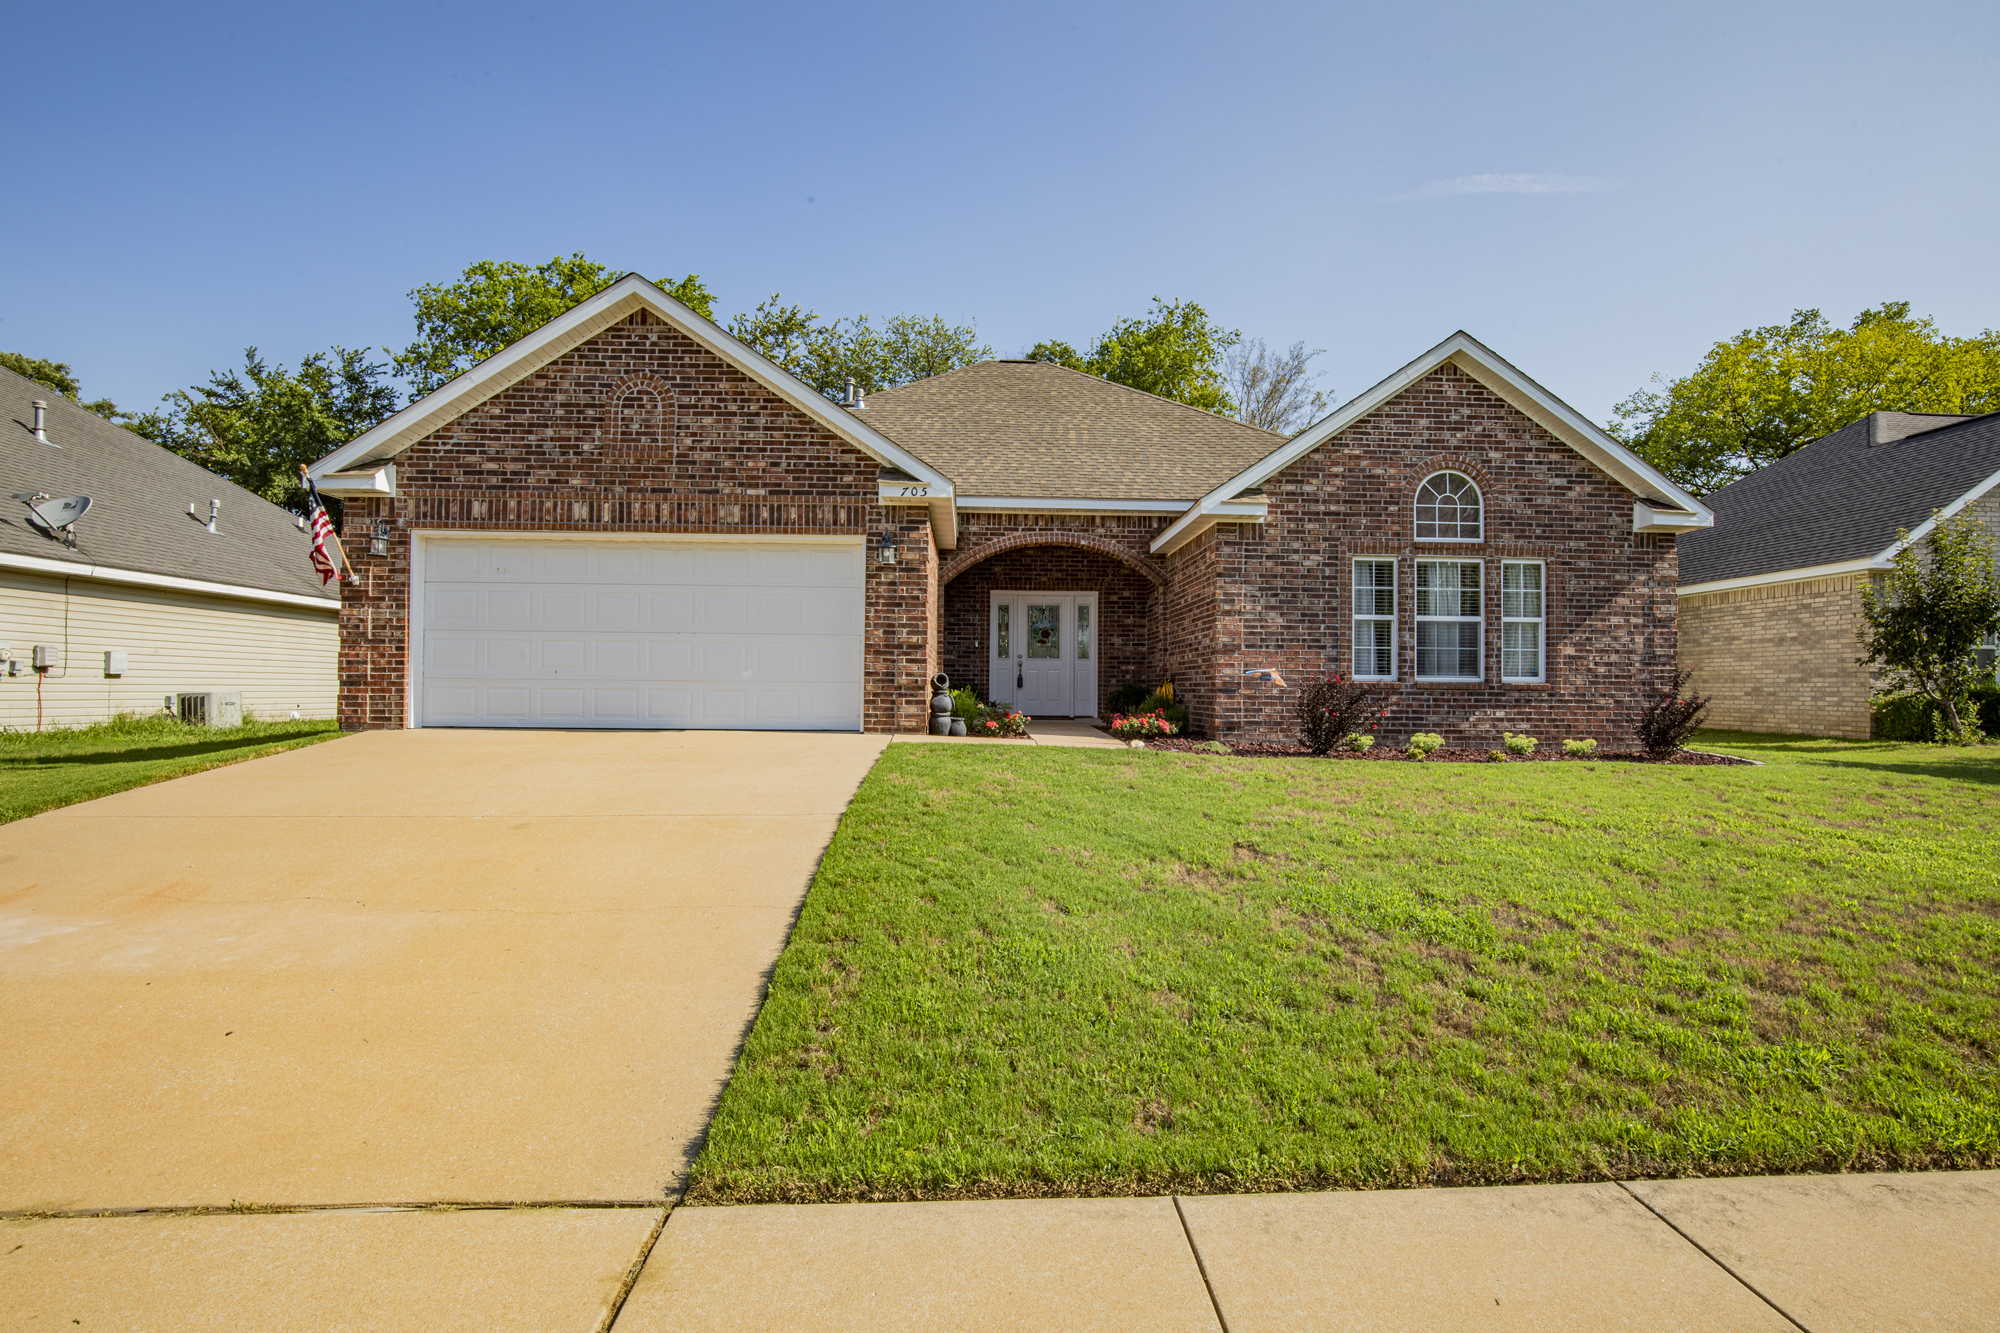 Siloam Springs home for sale